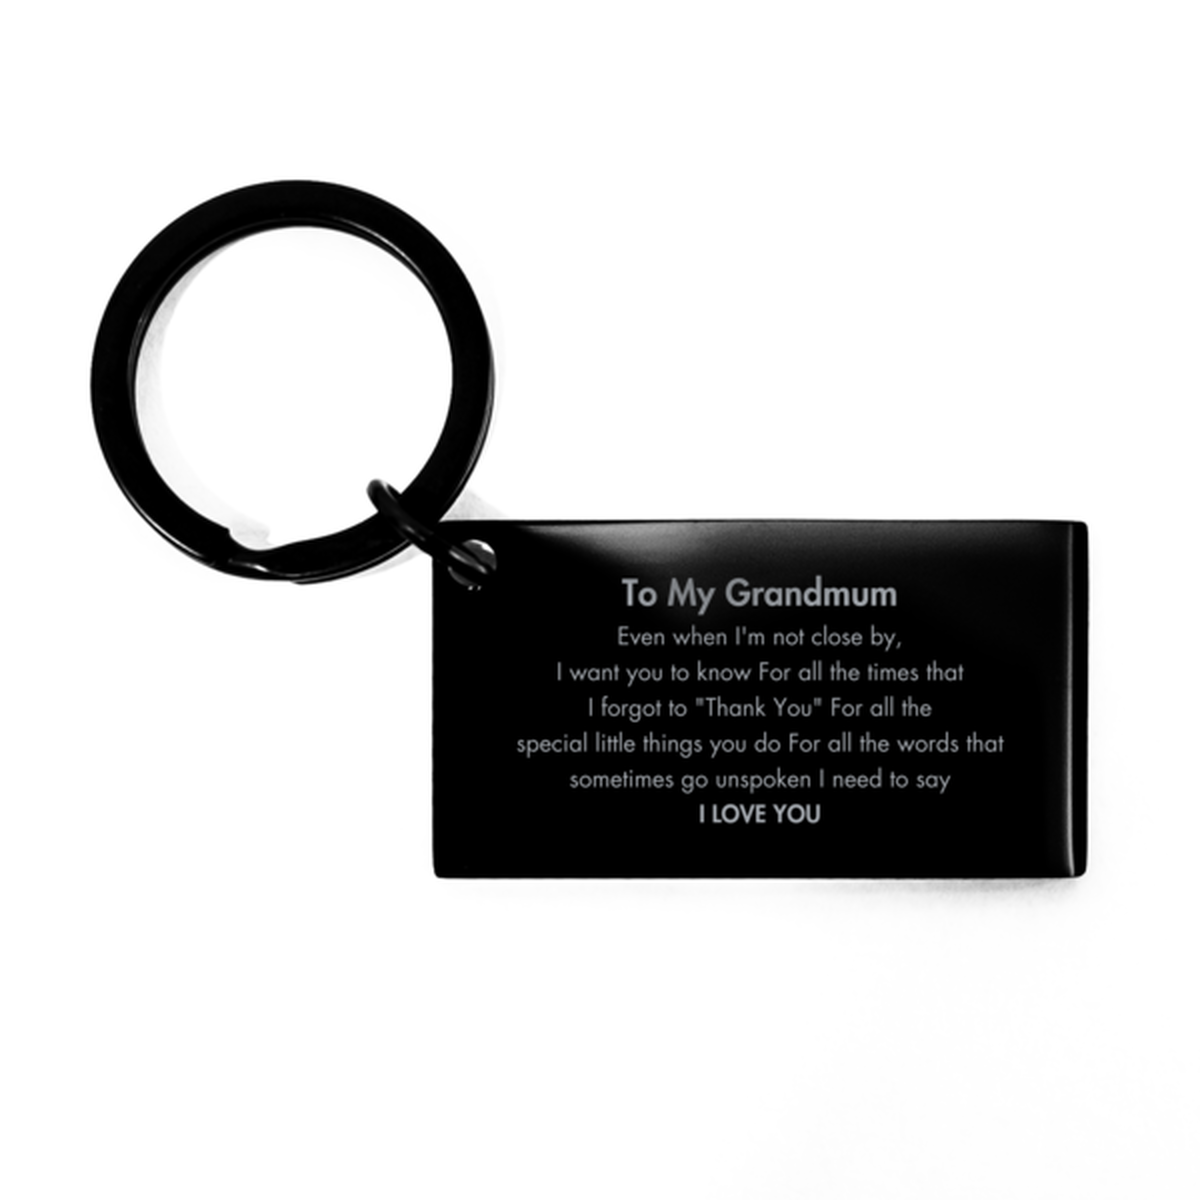 Thank You Gifts for Grandmum, Keepsake Keychain Gifts for Grandmum Birthday Mother's day Father's Day Grandmum For all the words That sometimes go unspoken I need to say I LOVE YOU